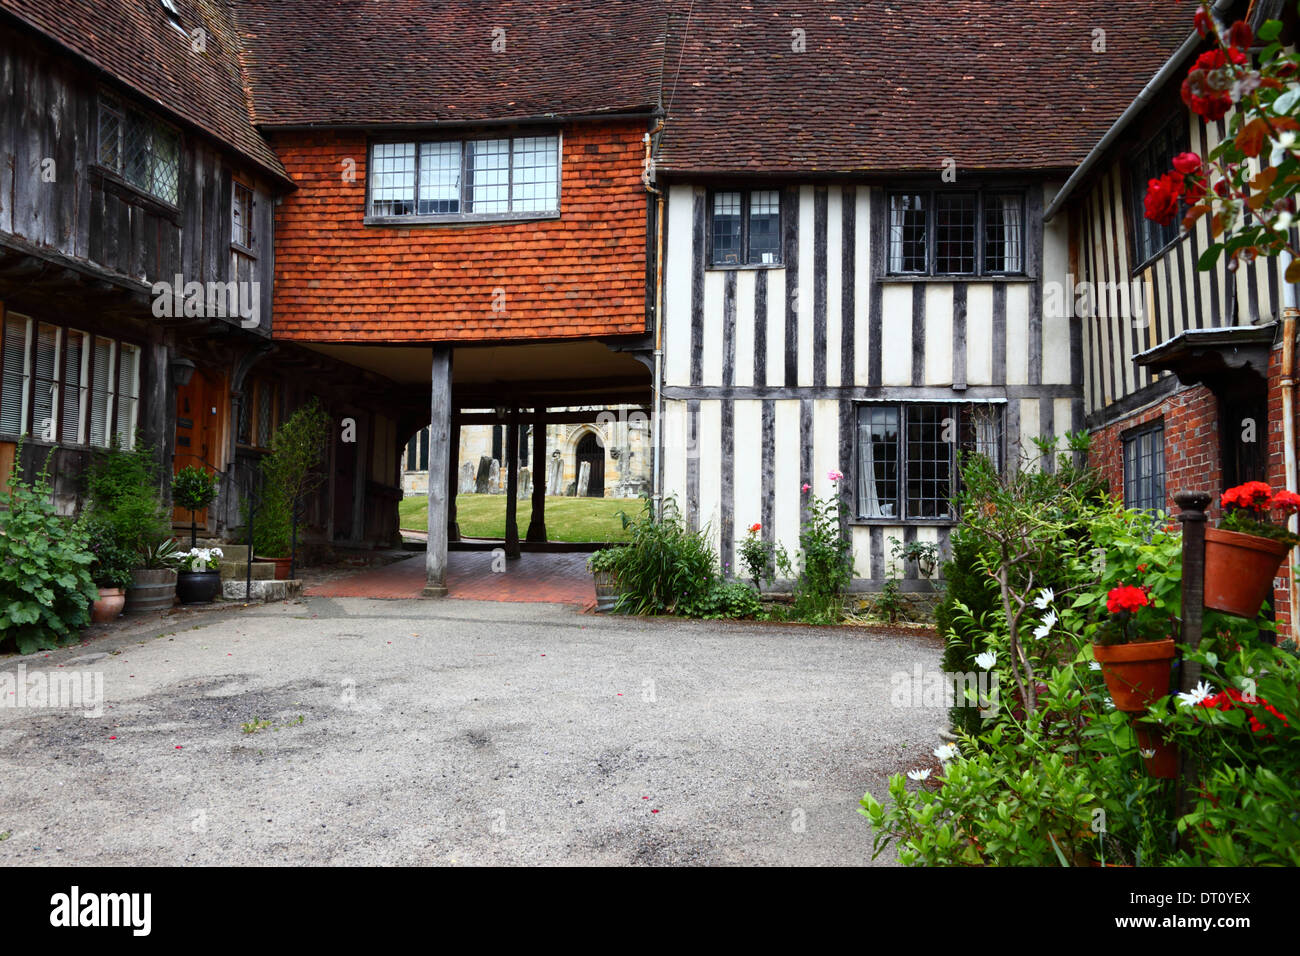 Historic cottages in Leicester Square and passage that is the entrance to the church (entrance visible in background), Penshurst, Kent, England Stock Photo